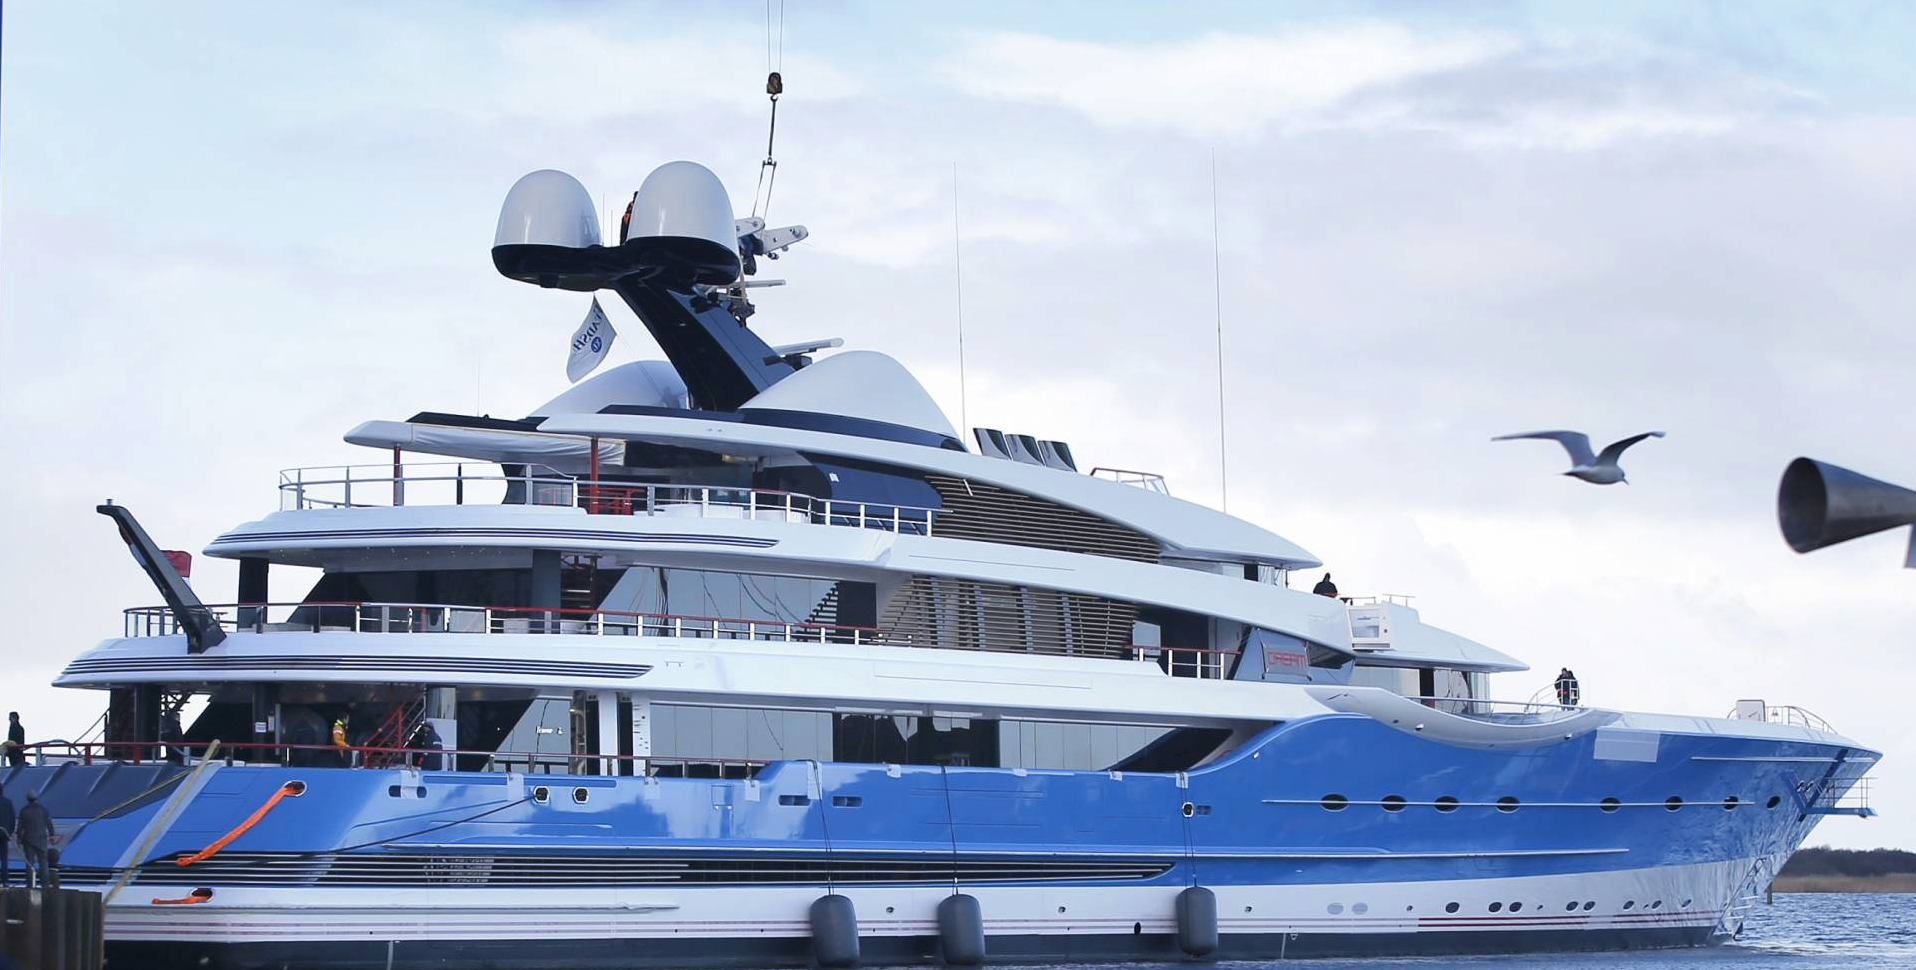 Russian owned yacht, Netherlands impounds yachts